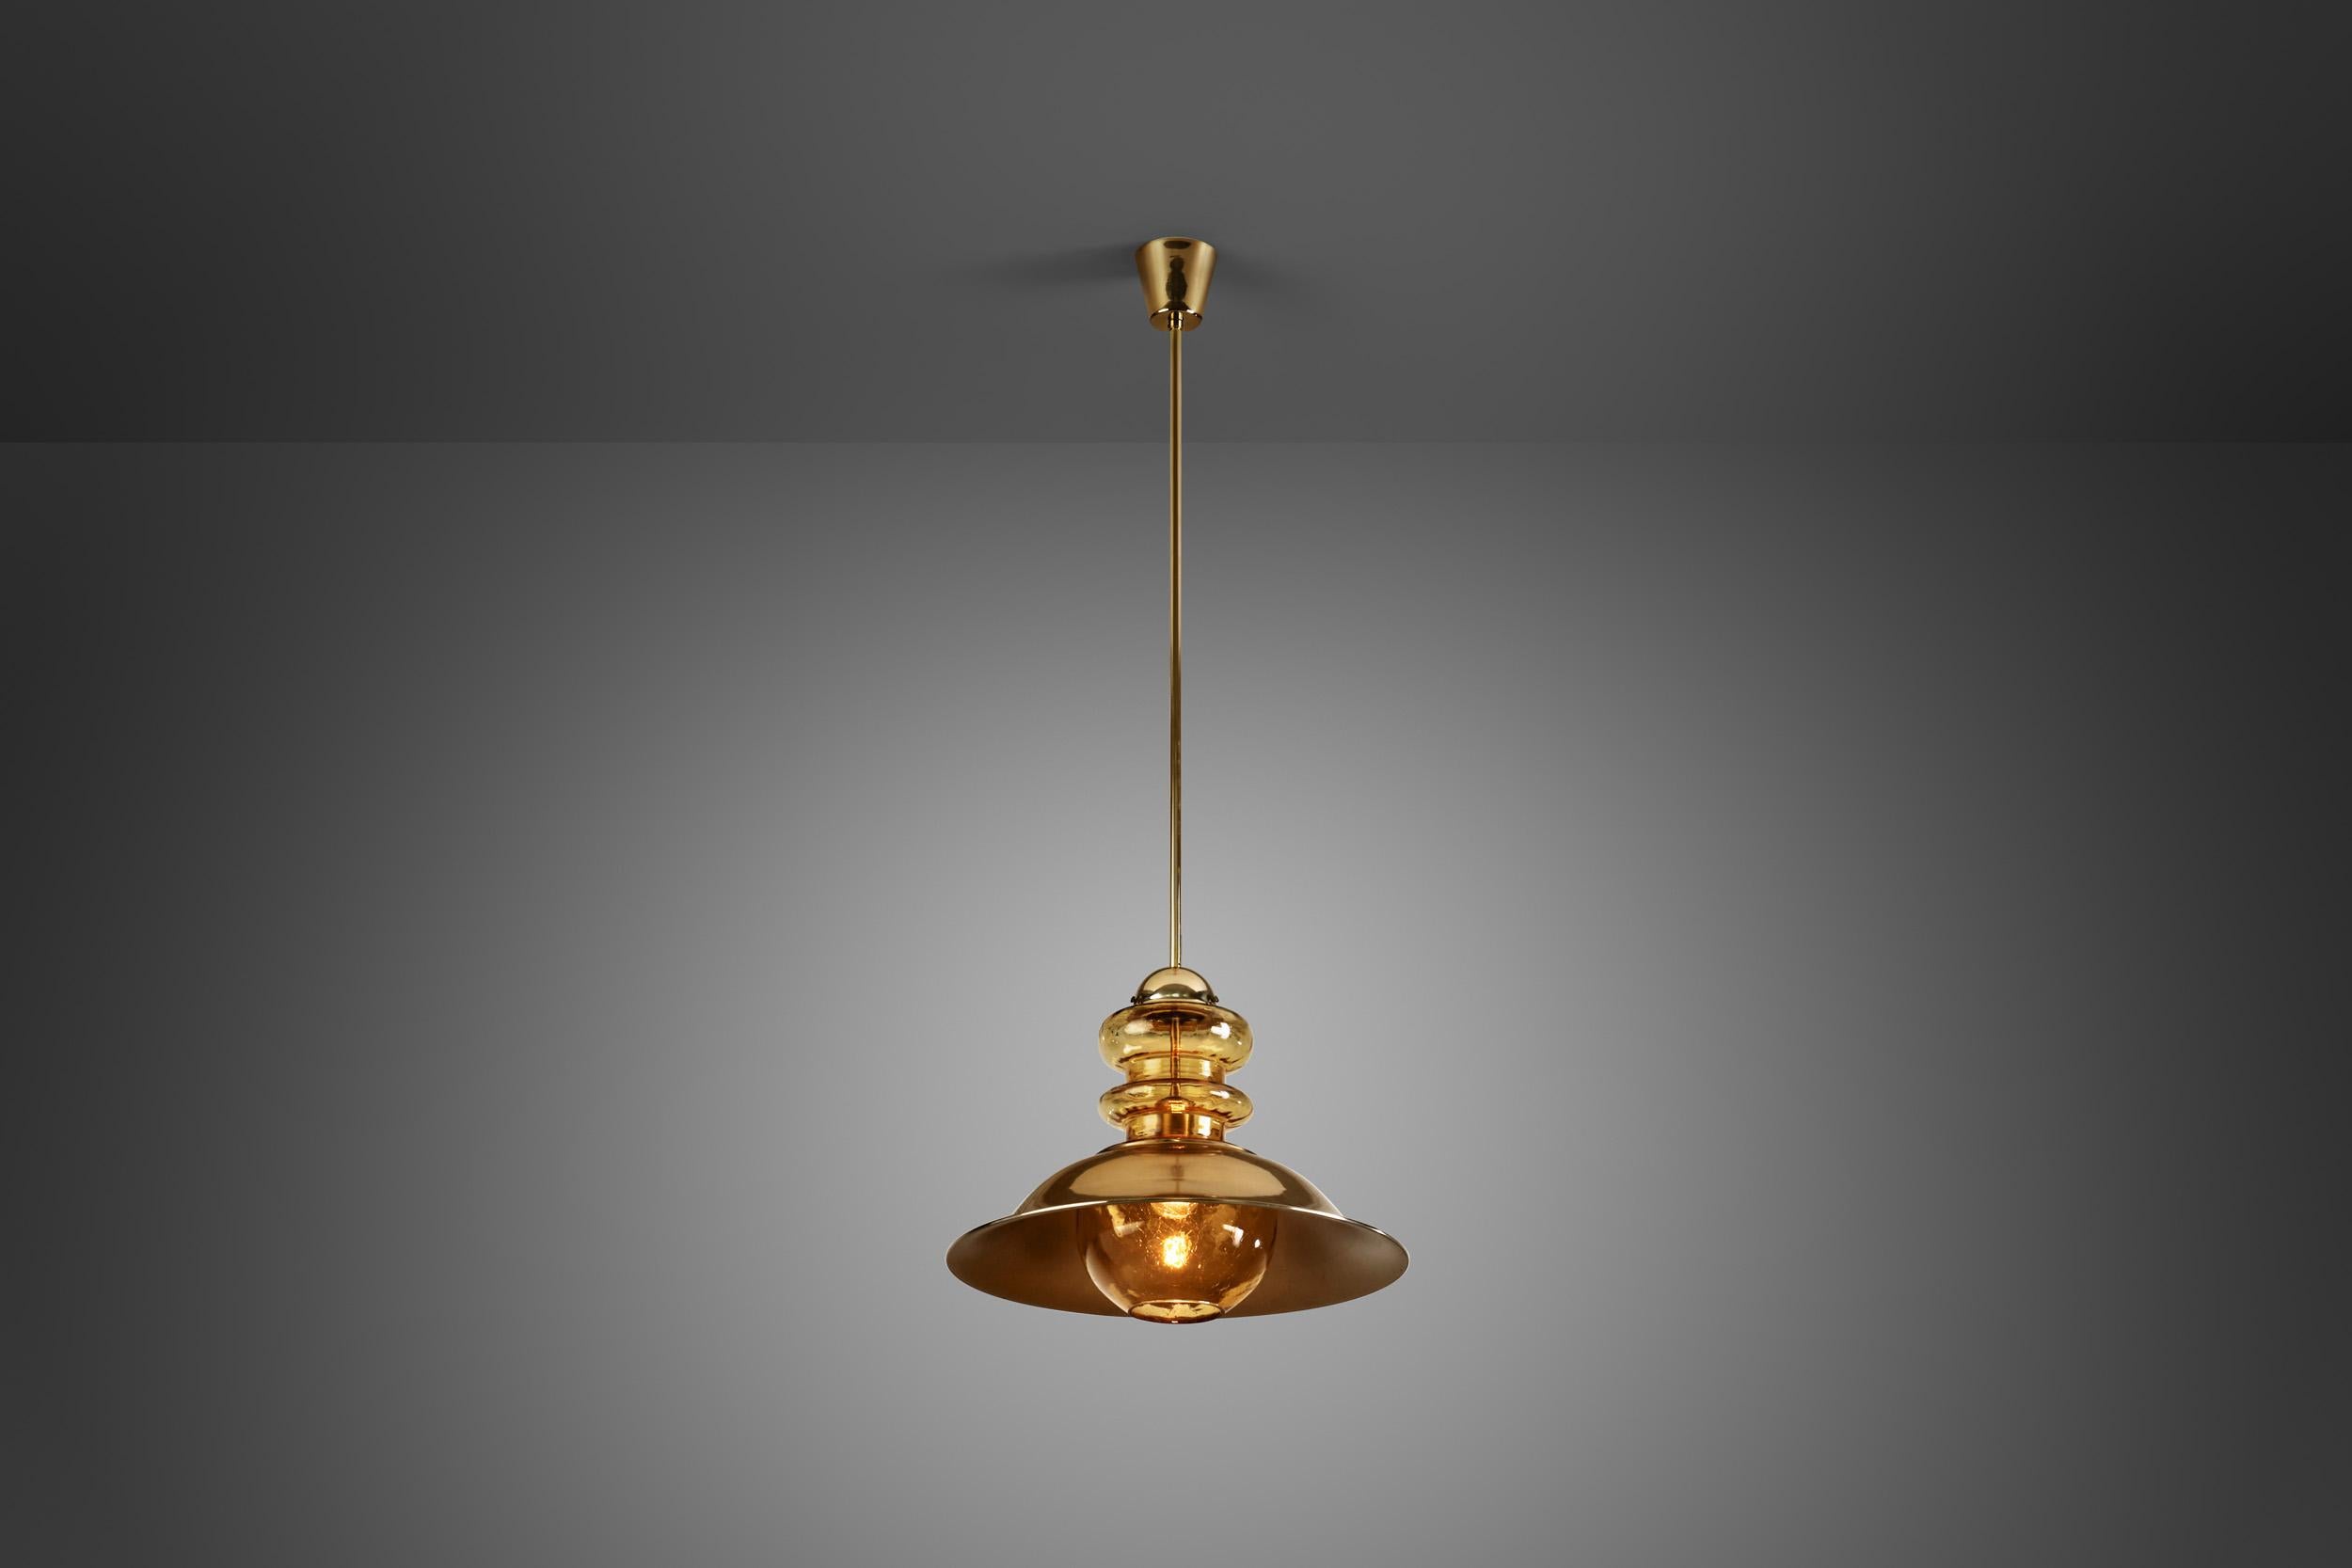 European Brass Pendant Light with Patterned Amber Glass, Europe, circa 1960s For Sale